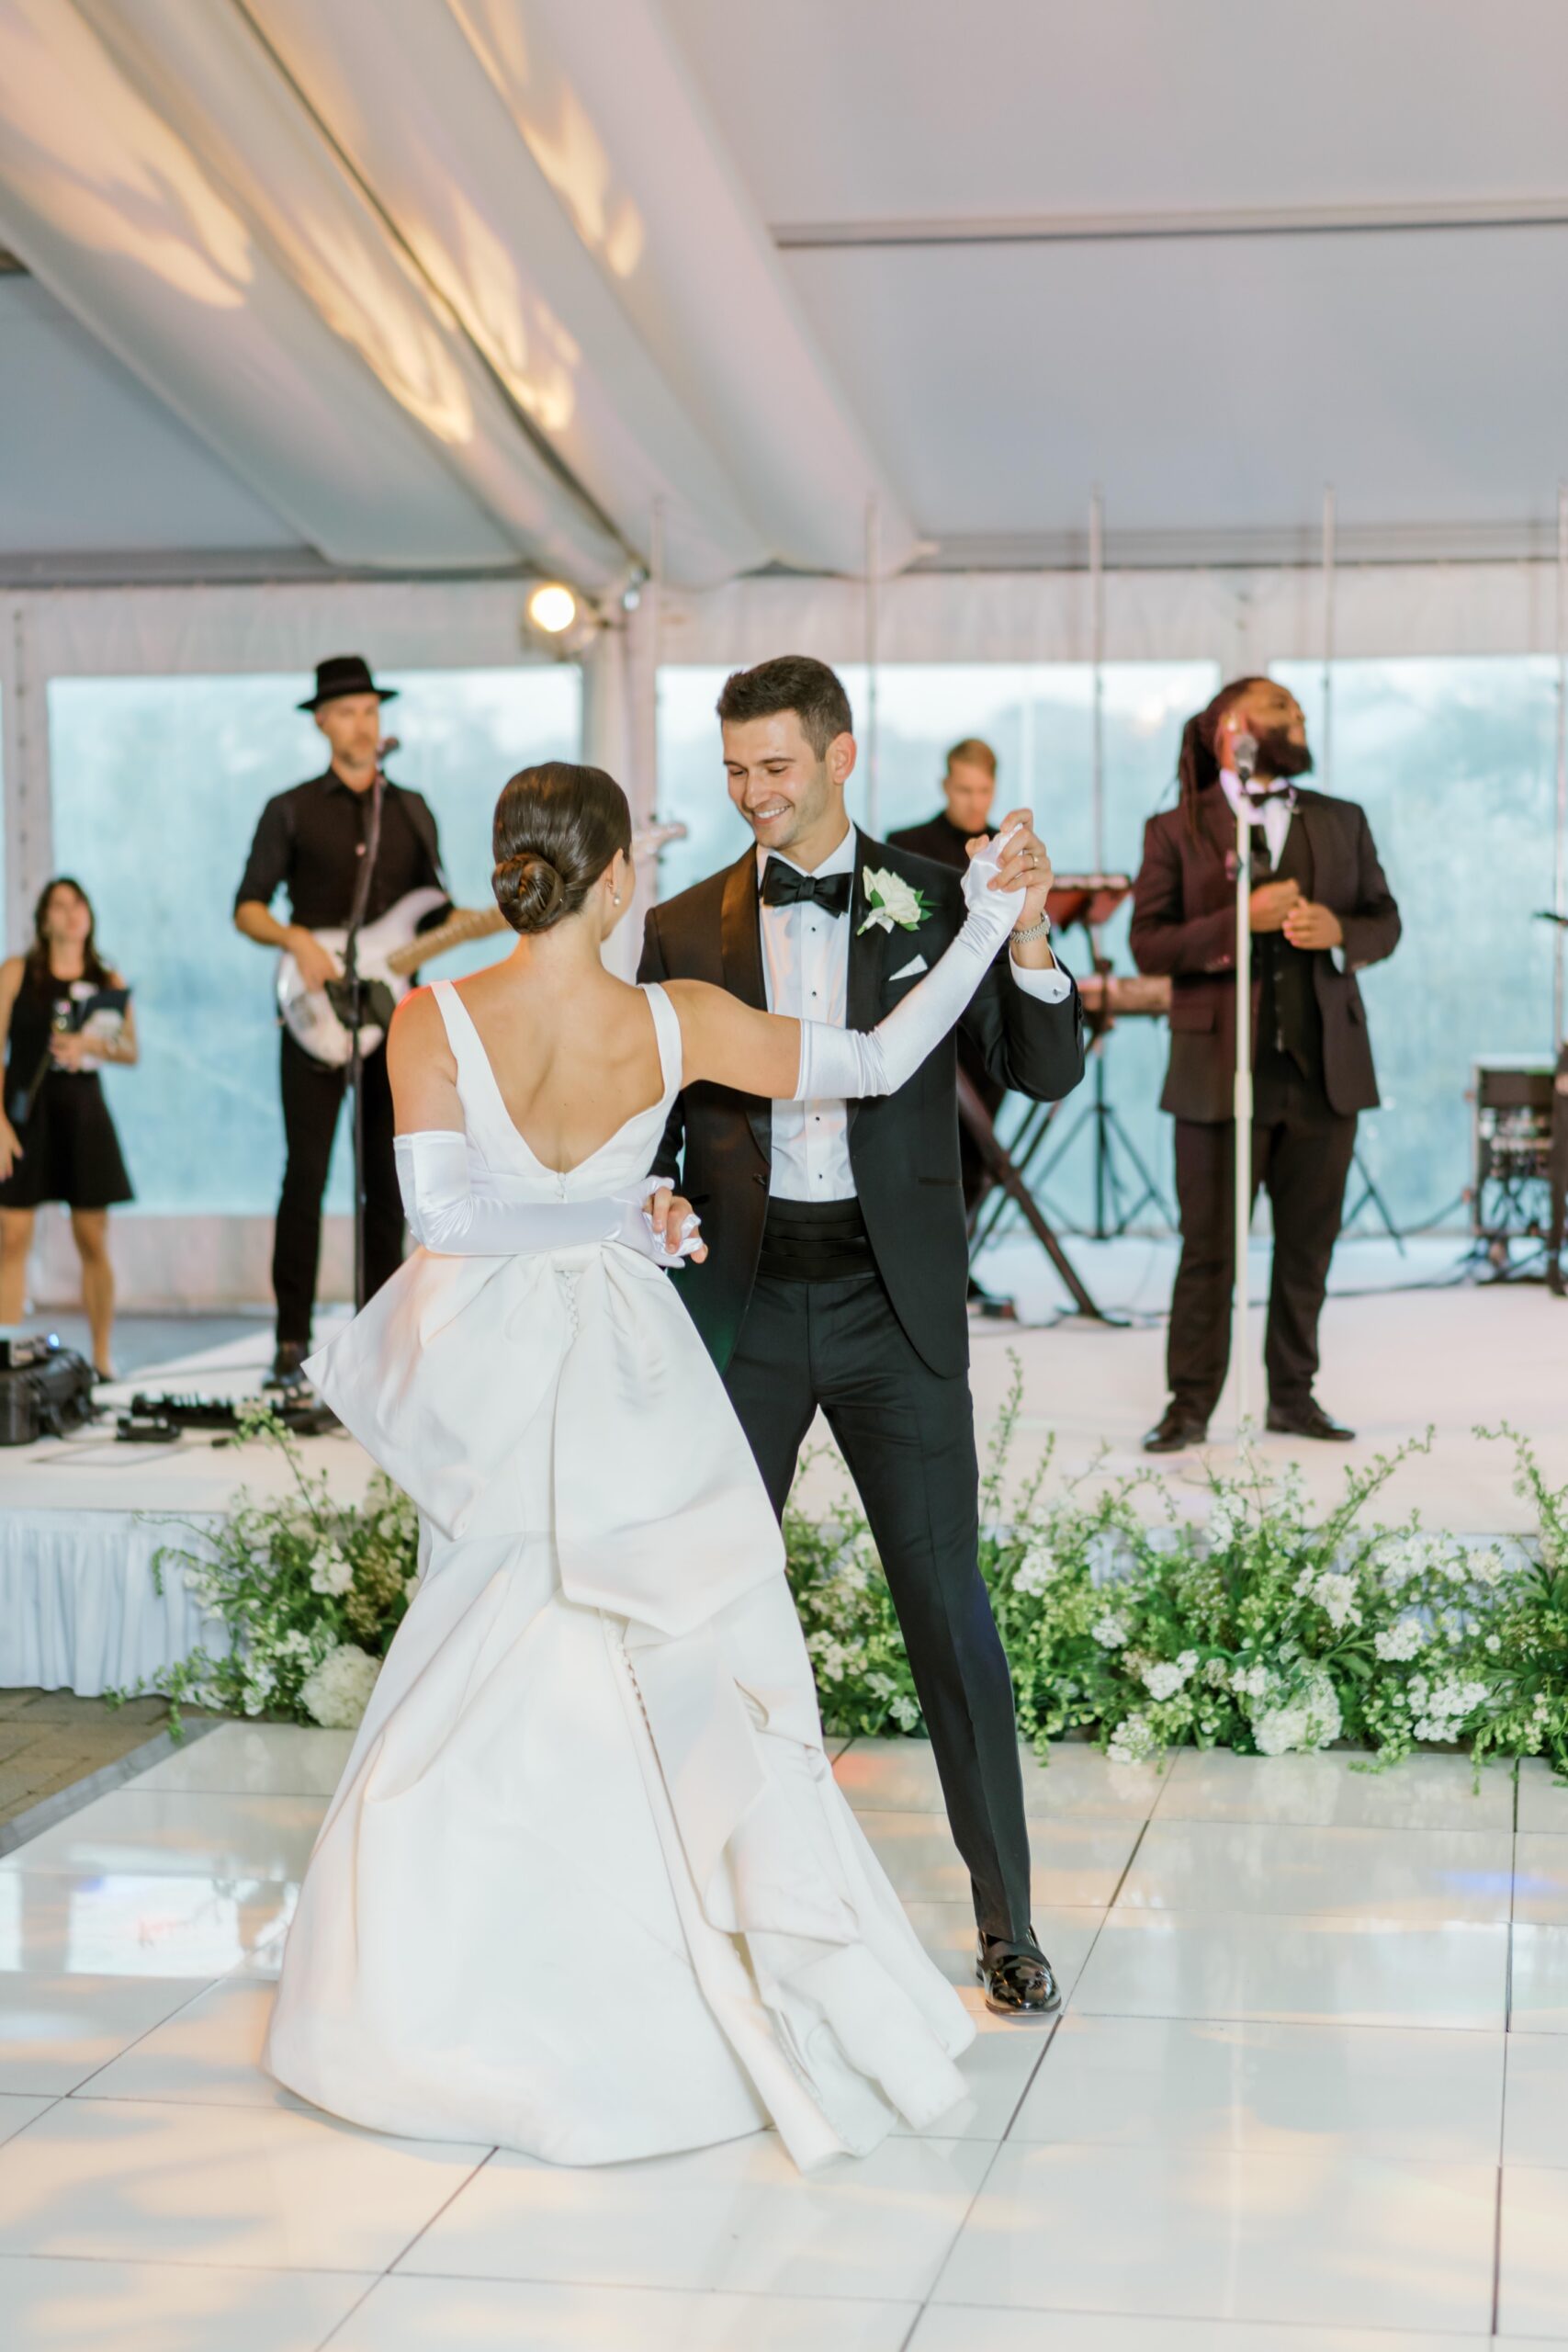 Bride and groom have first dance at Greenacres wedding